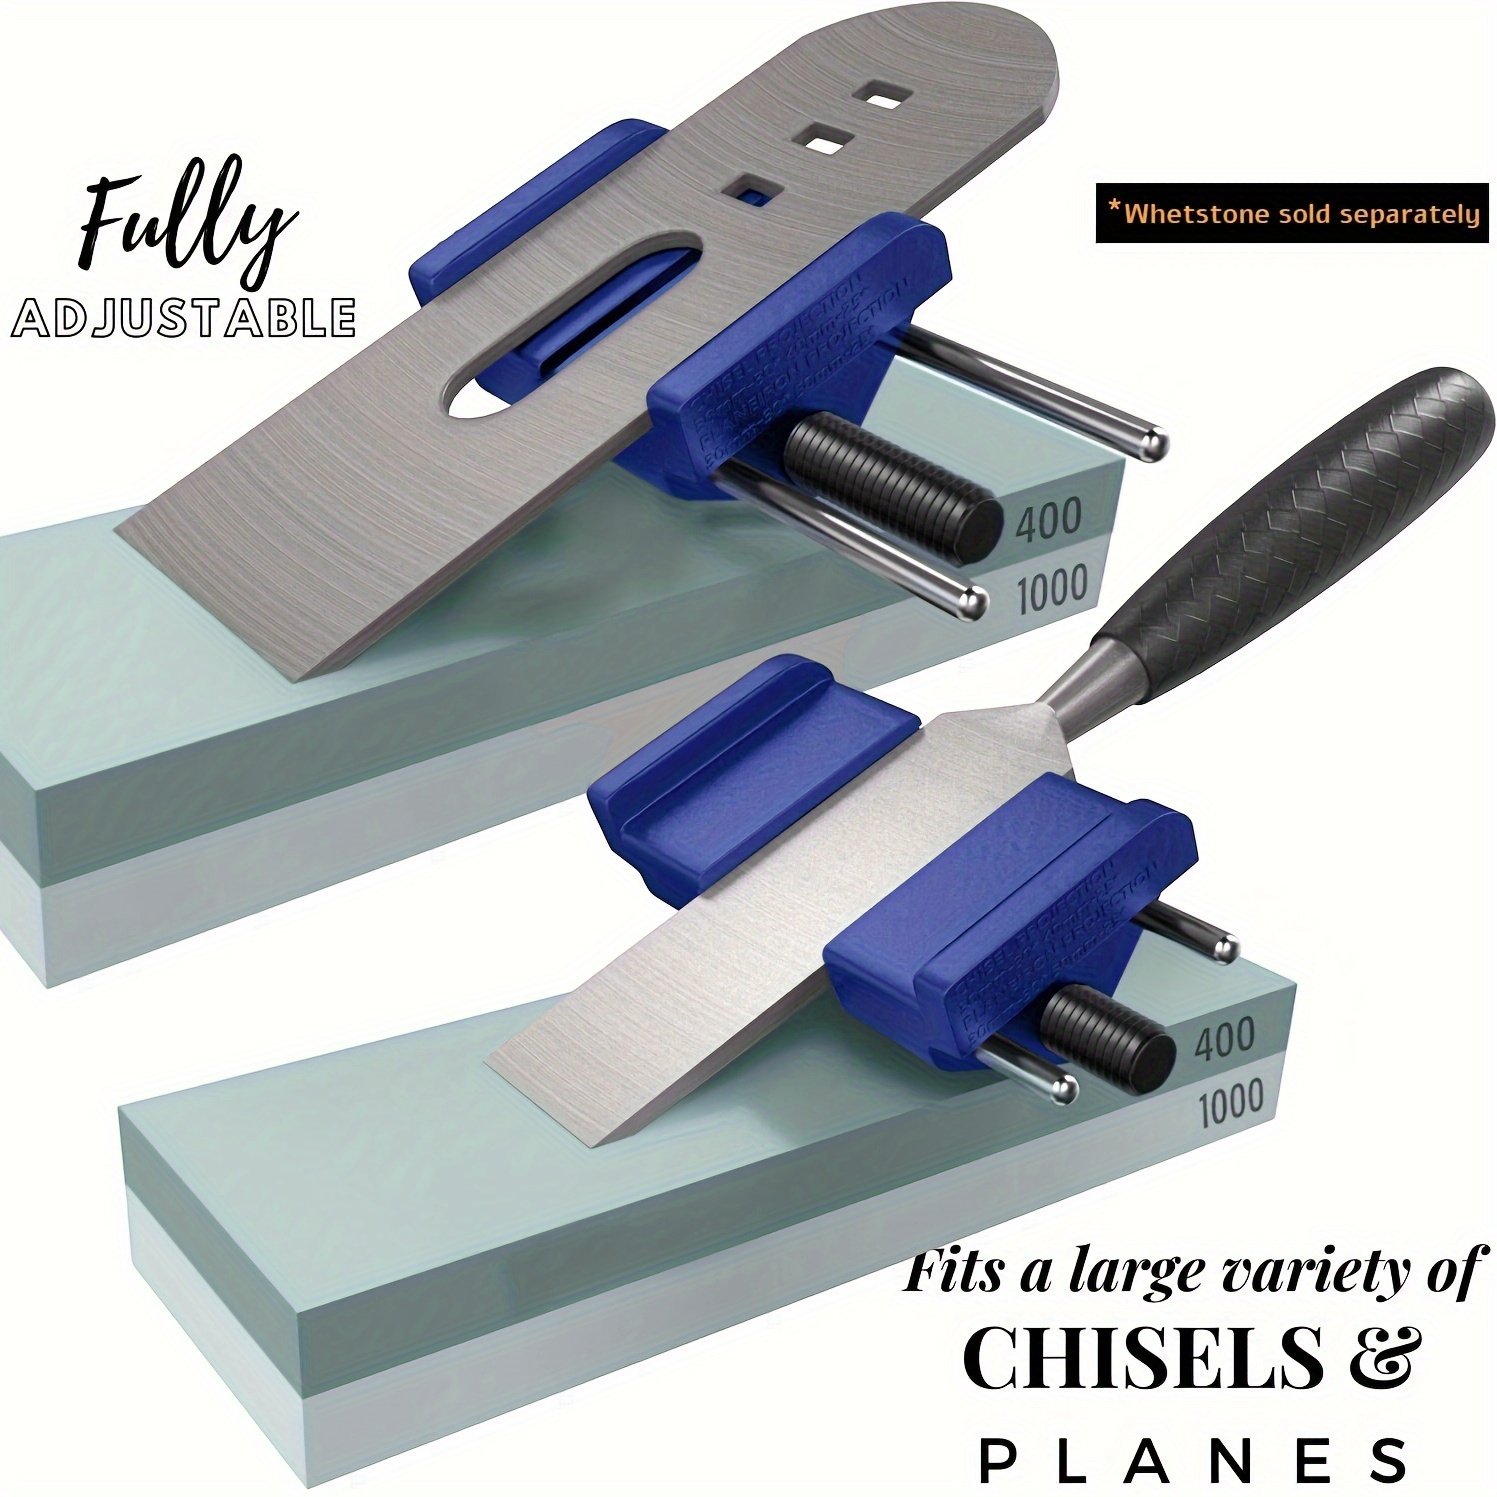 TFQQ Honing Guide with Extend Roller Glides - Chisel Sharpening Jig for  Chisels and Planes - Fits Chisels or Planer Blades 0 to 2.625”